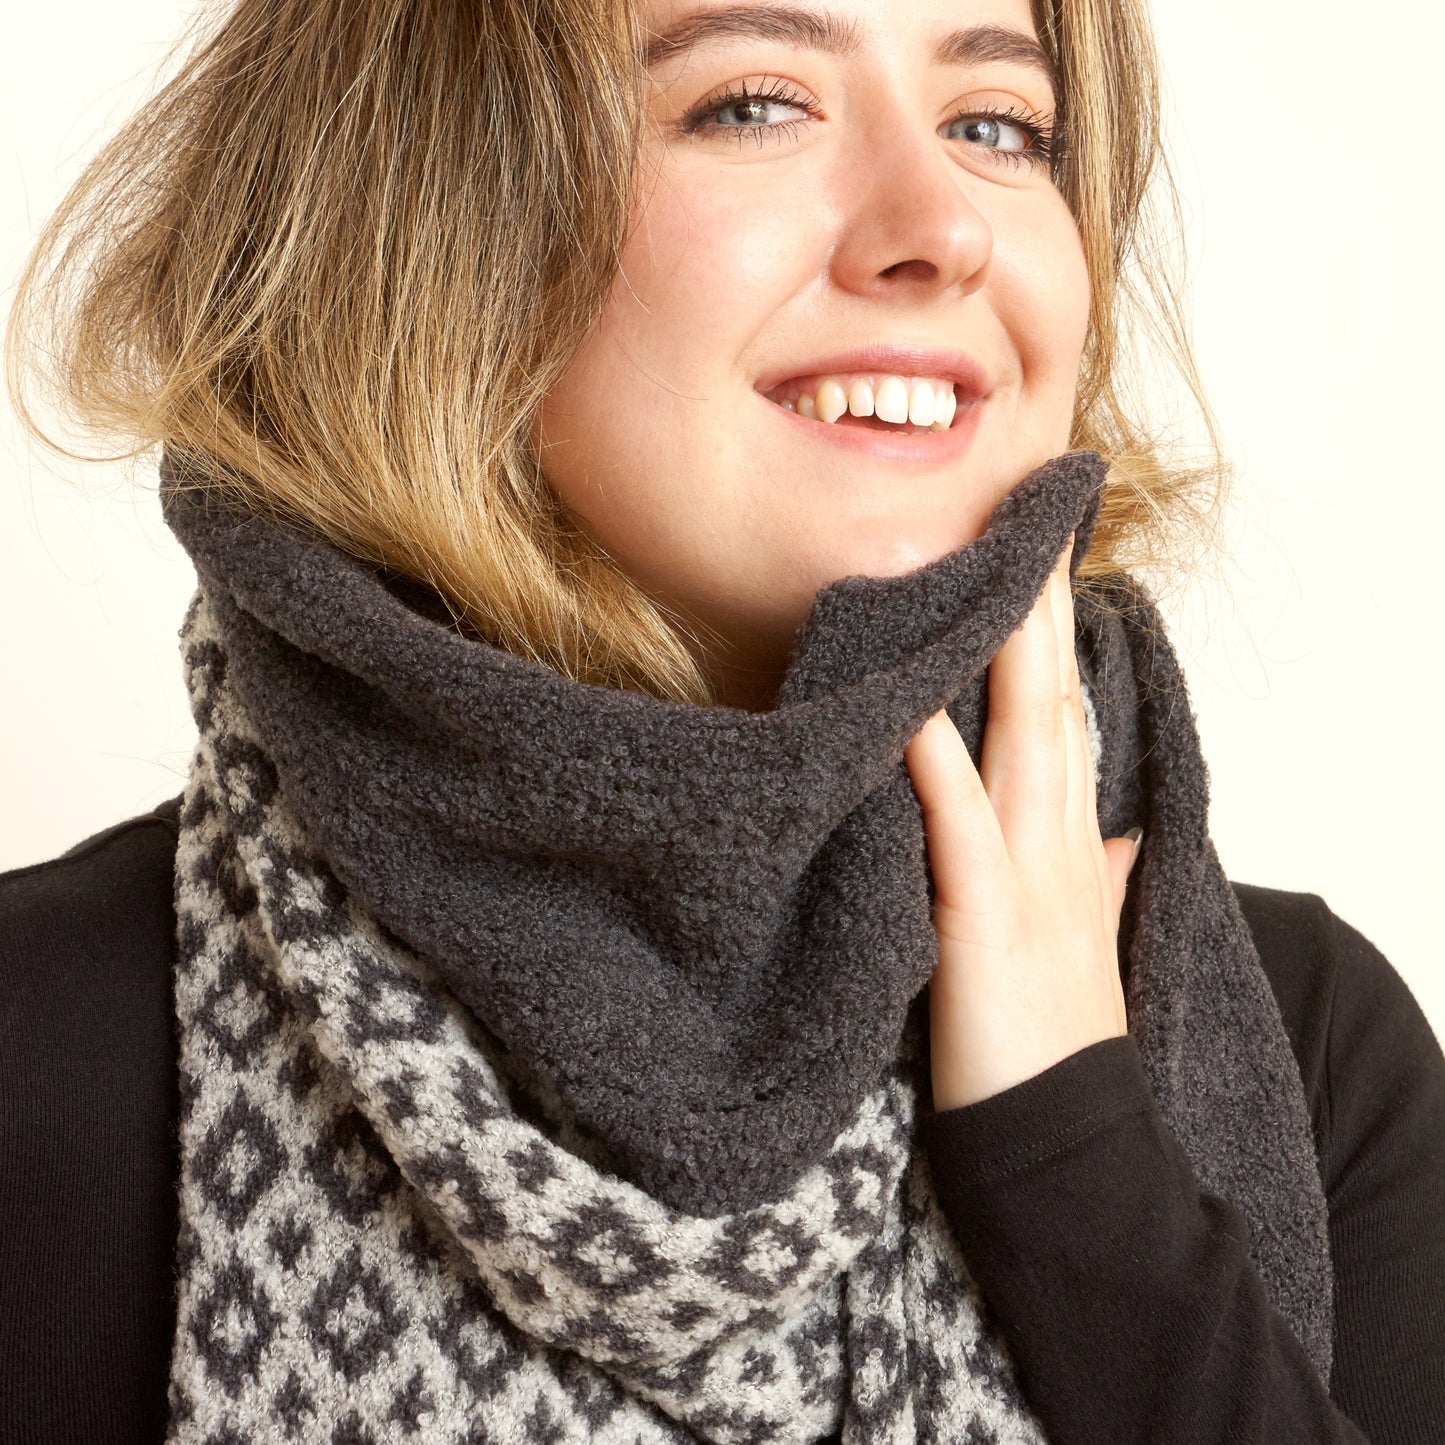 Lovely knitted scarf using luxurious Italian yarn, this 2 colour jacquard pattern scarf is beautifully soft and sumptuous to wear.  The geometric pattern  "Carsphairn" is just the right scale for a scarf and easy to wear. Dove Grey colour shown here worn with plain Charcoal grey scarf.l